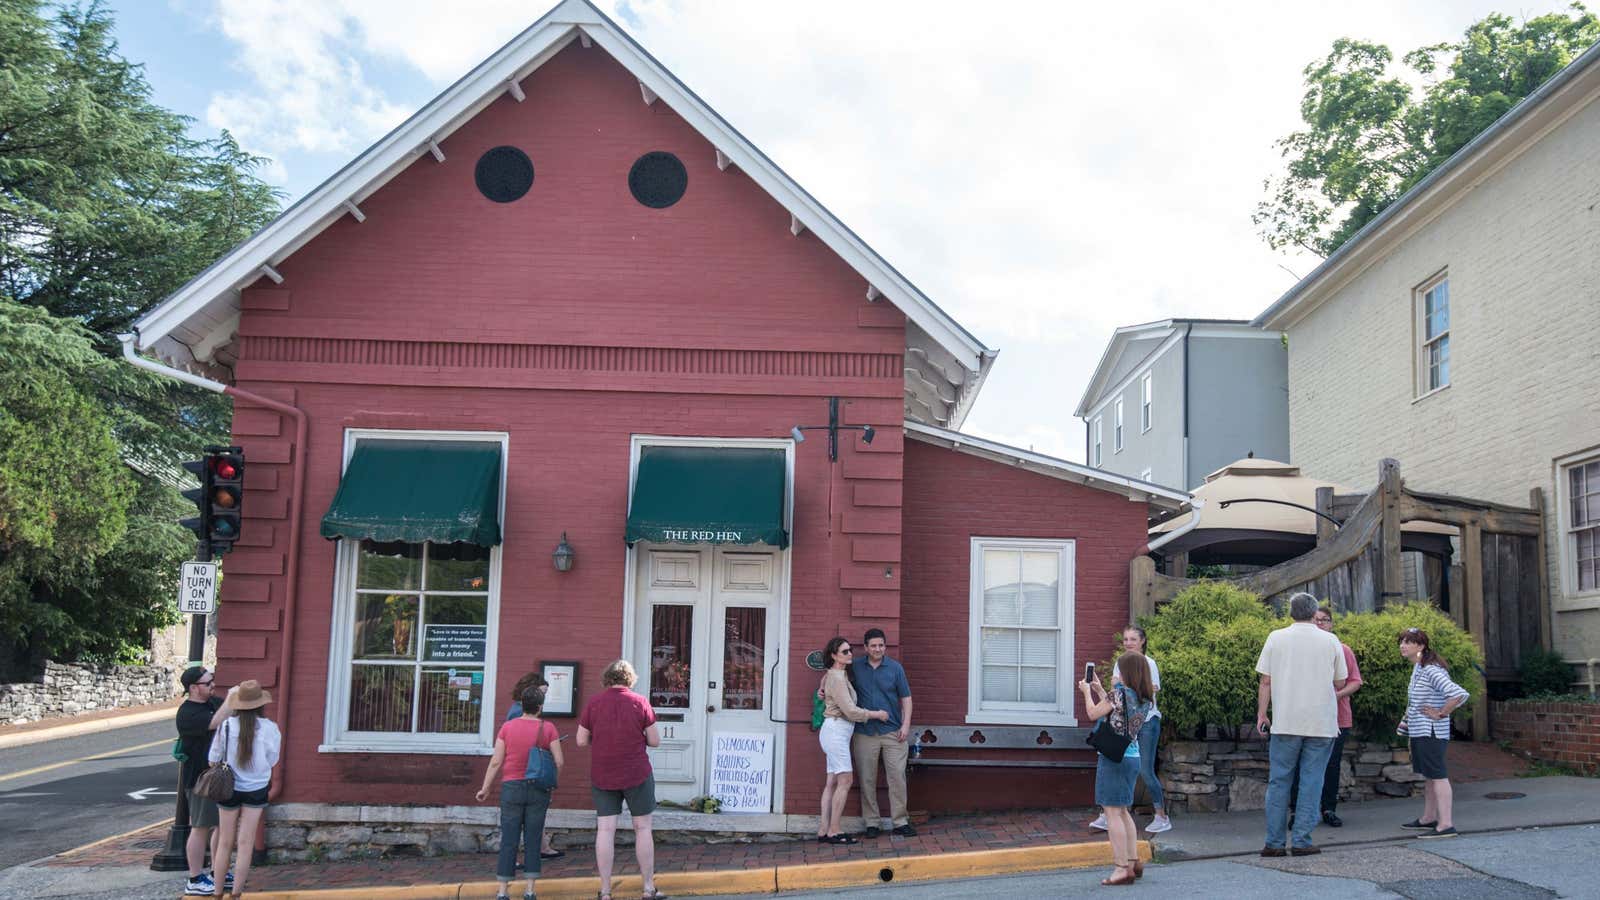 Passersby gather to take photos in front of the Red Hen Restaurant, Saturday, June 23, 2018.